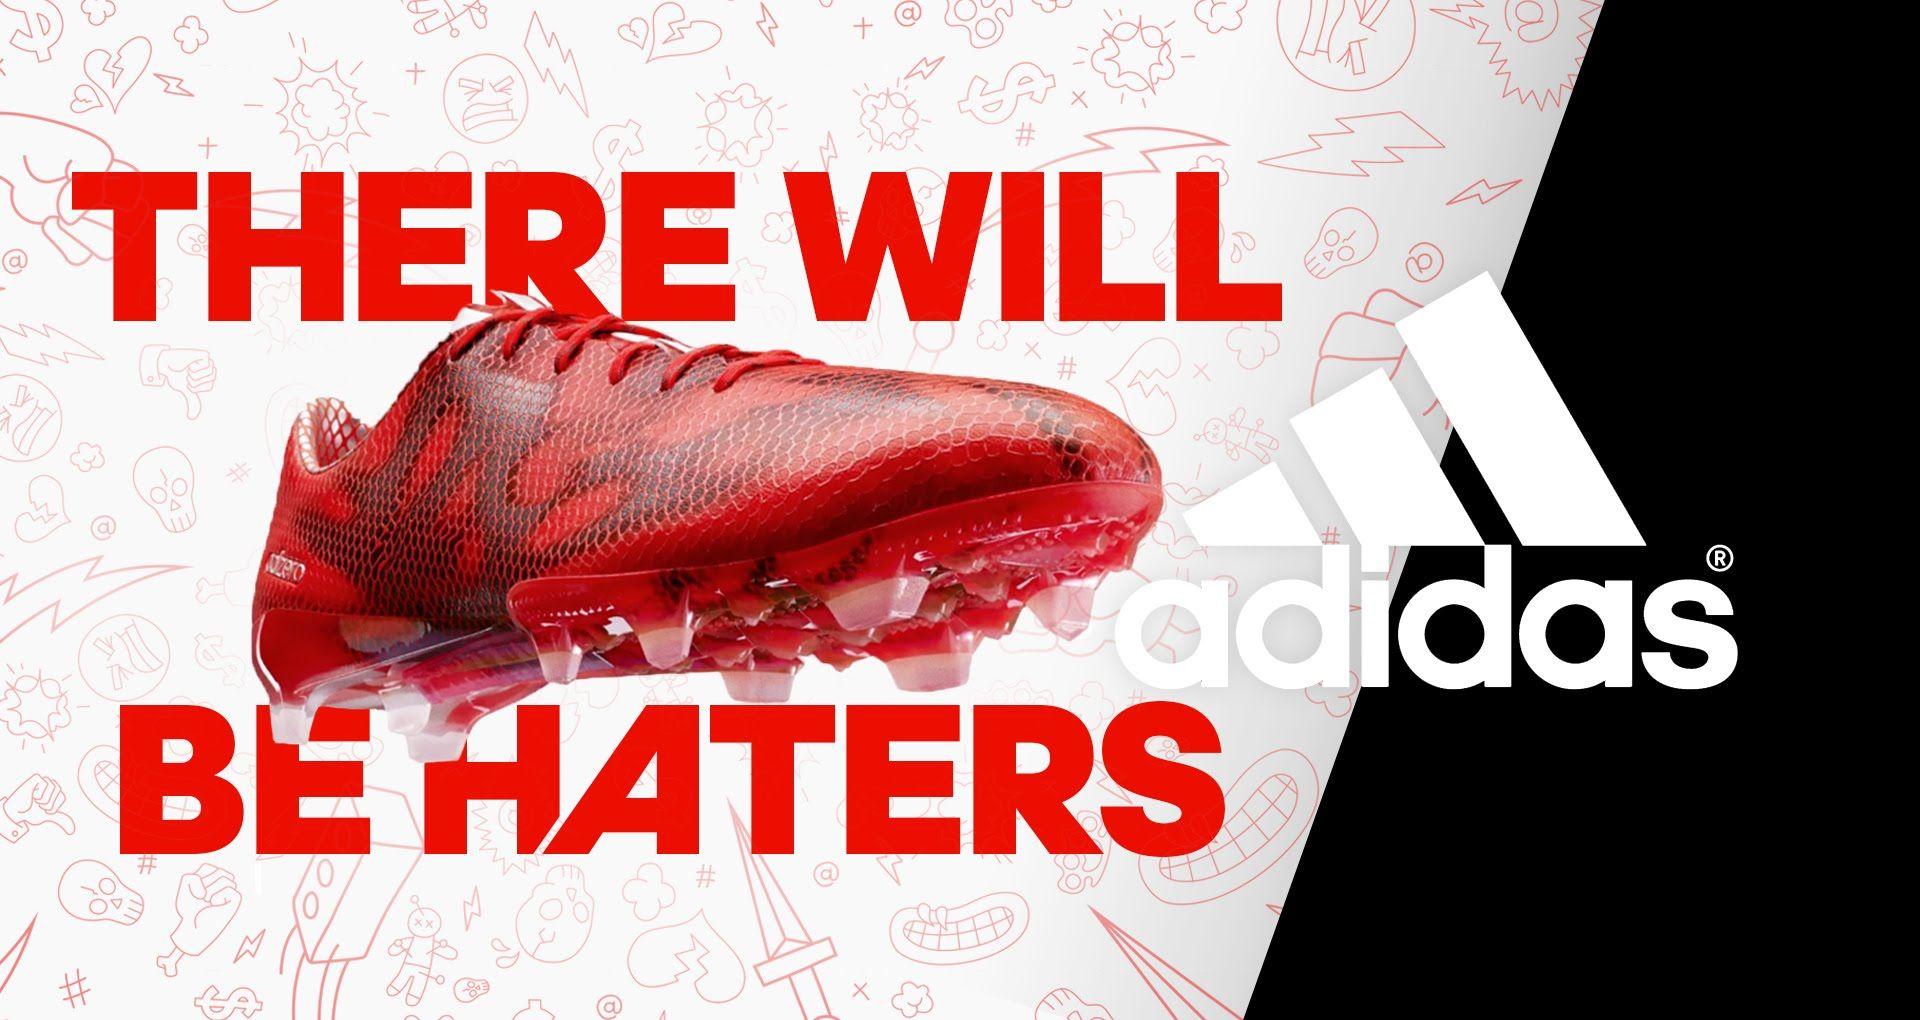 Adidas Digital Advert By Iris: There will be haters. Ads of the World™